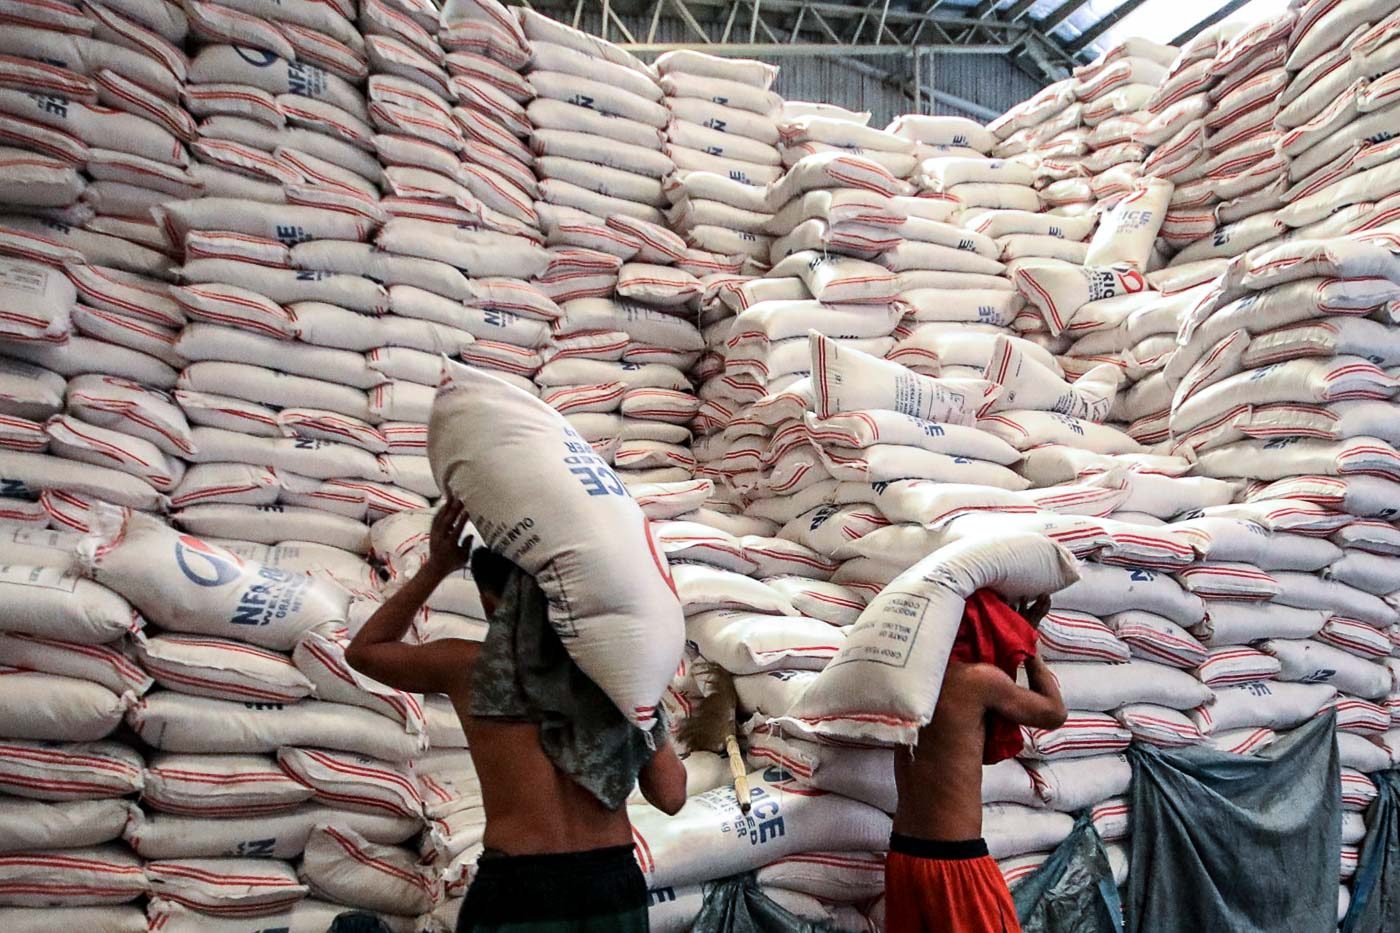 NFA buys more palay in Q1 2019